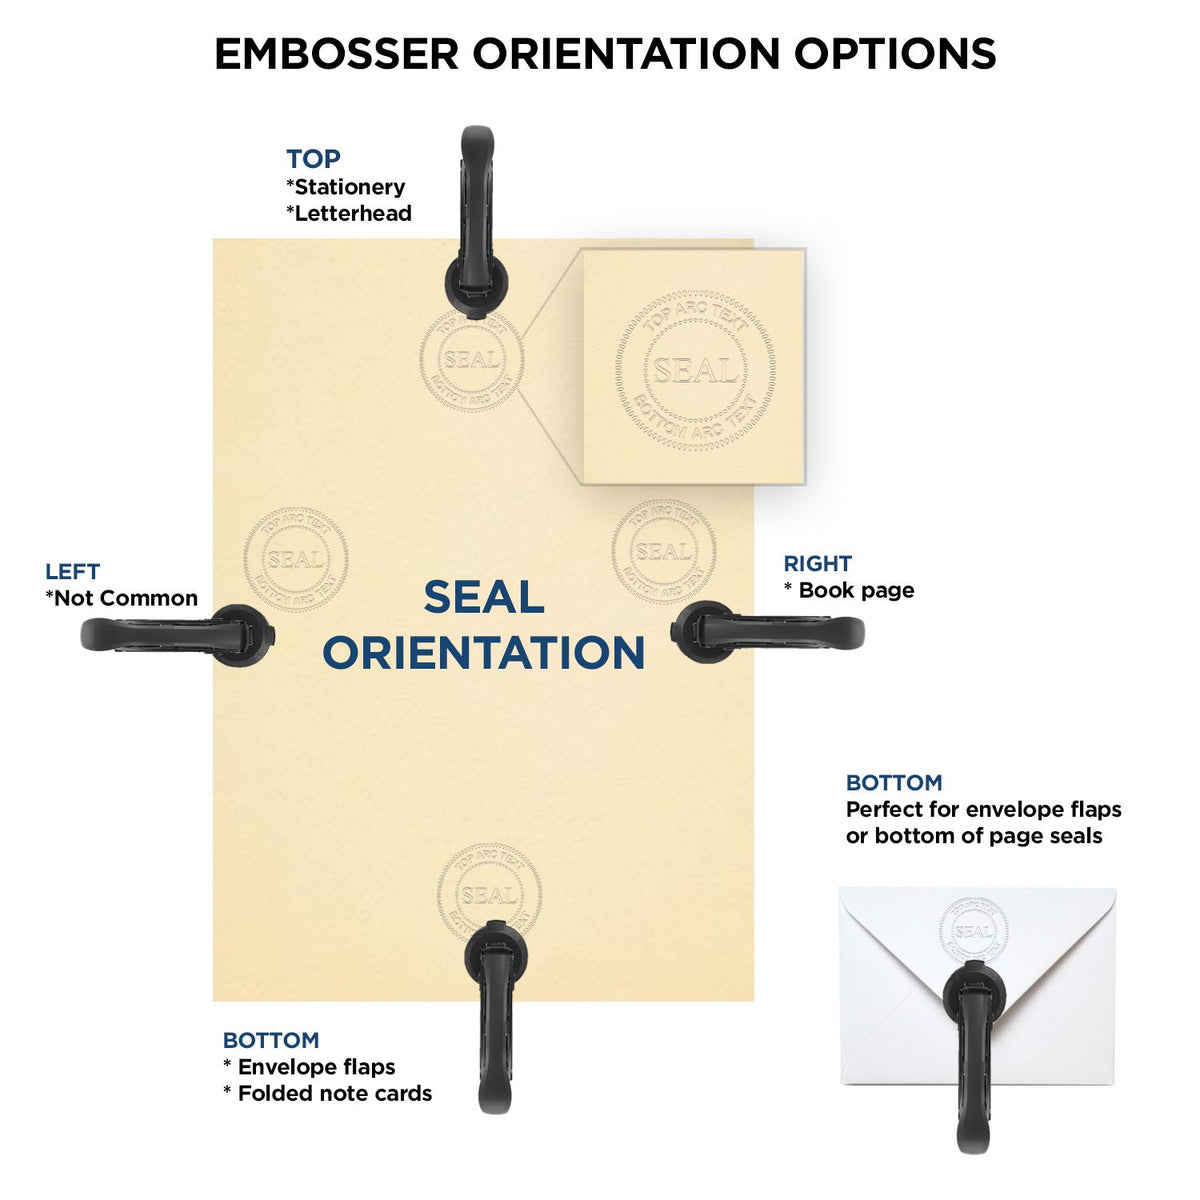 An infographic for the Heavy Duty Cast Iron Colorado Architect Embosser showing embosser orientation, this is showing examples of a top, bottom, right and left insert.